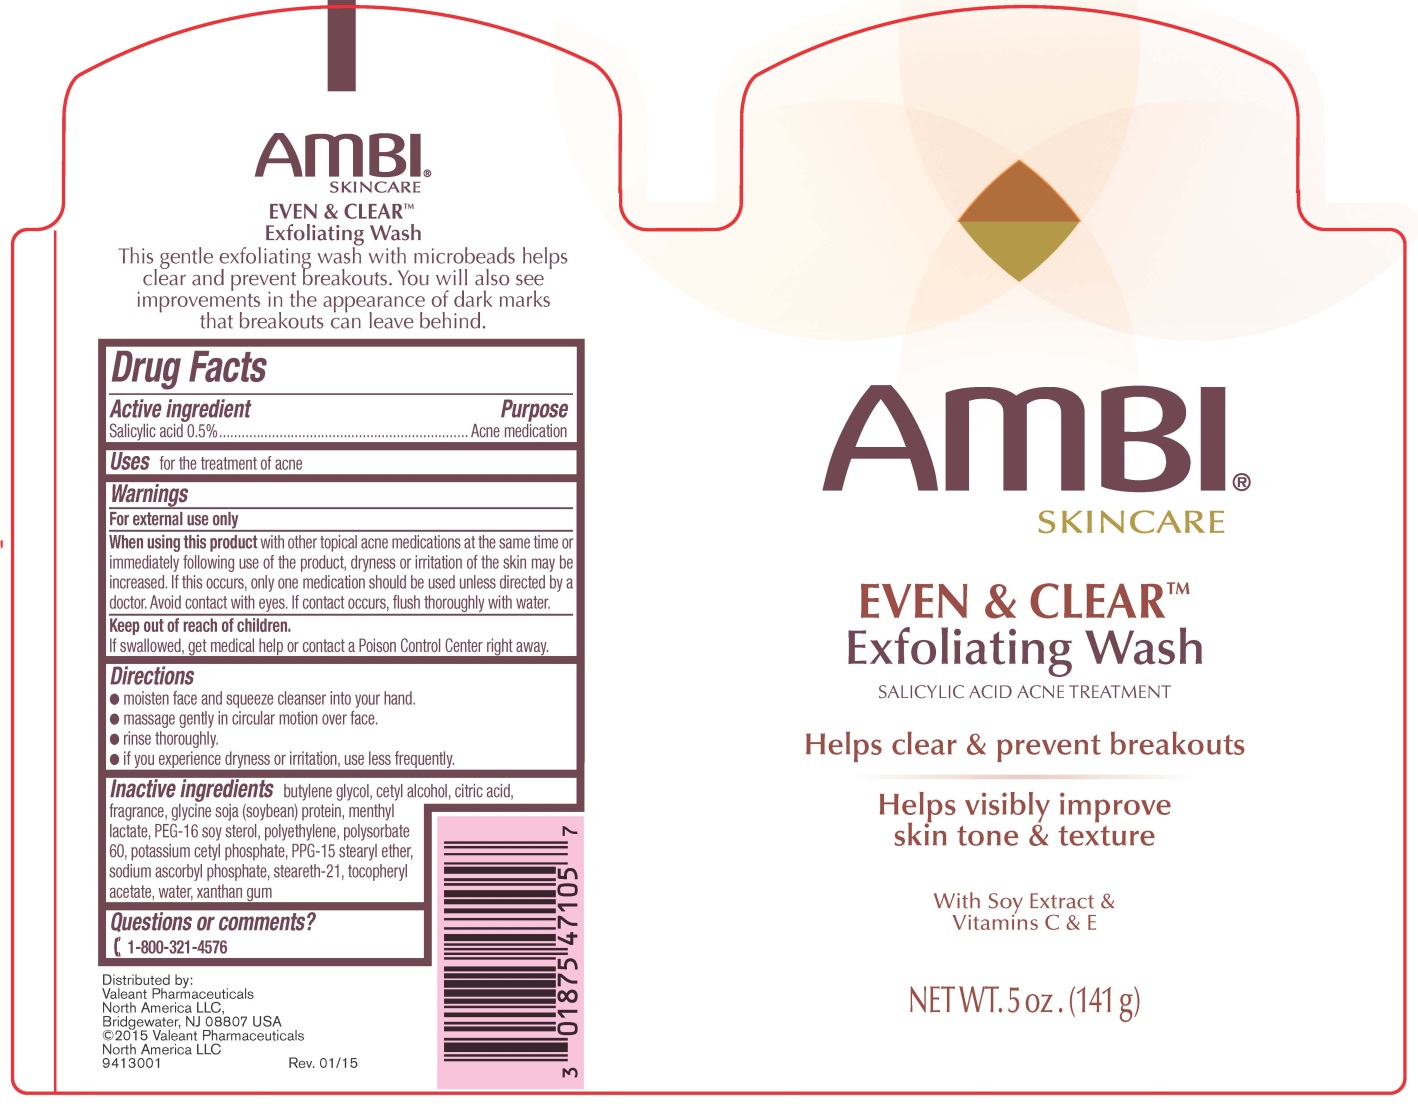 AMBI Even & Clear Exfoliating Wash - 141g Bottle